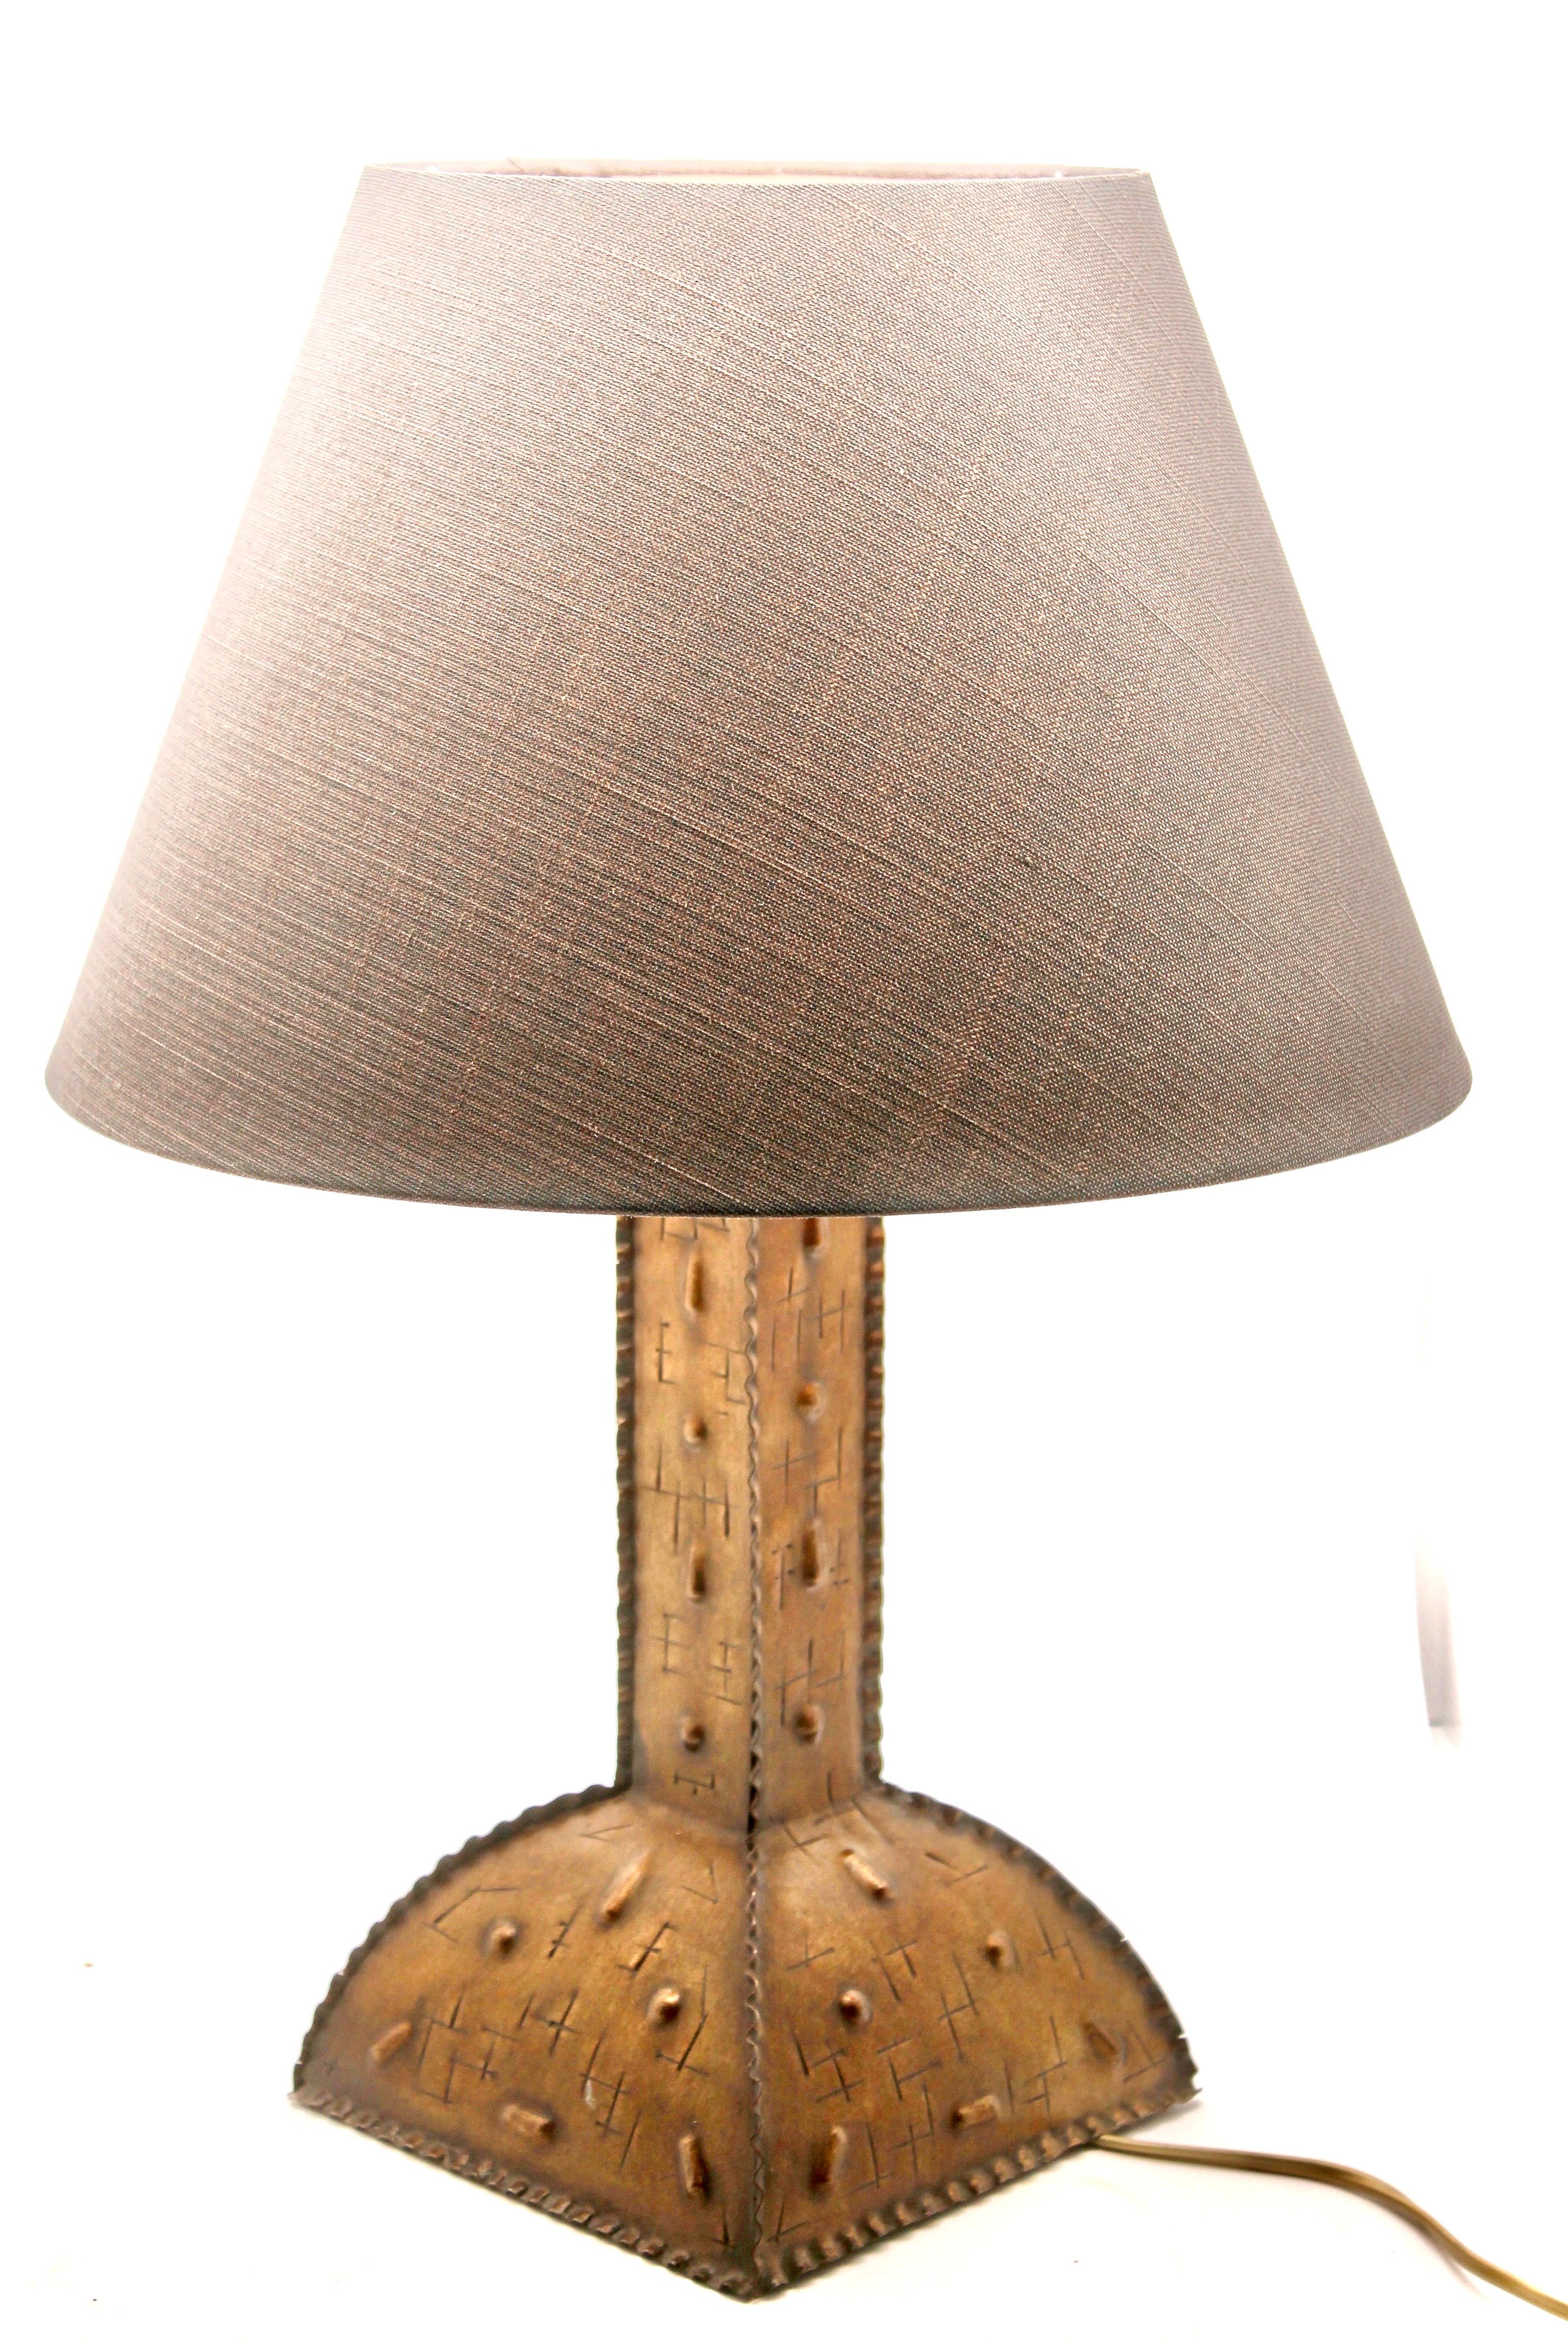 Arts and Crafts Arts & Crafts, Beaten Copper Table Lamp with Original Patina, Handmade